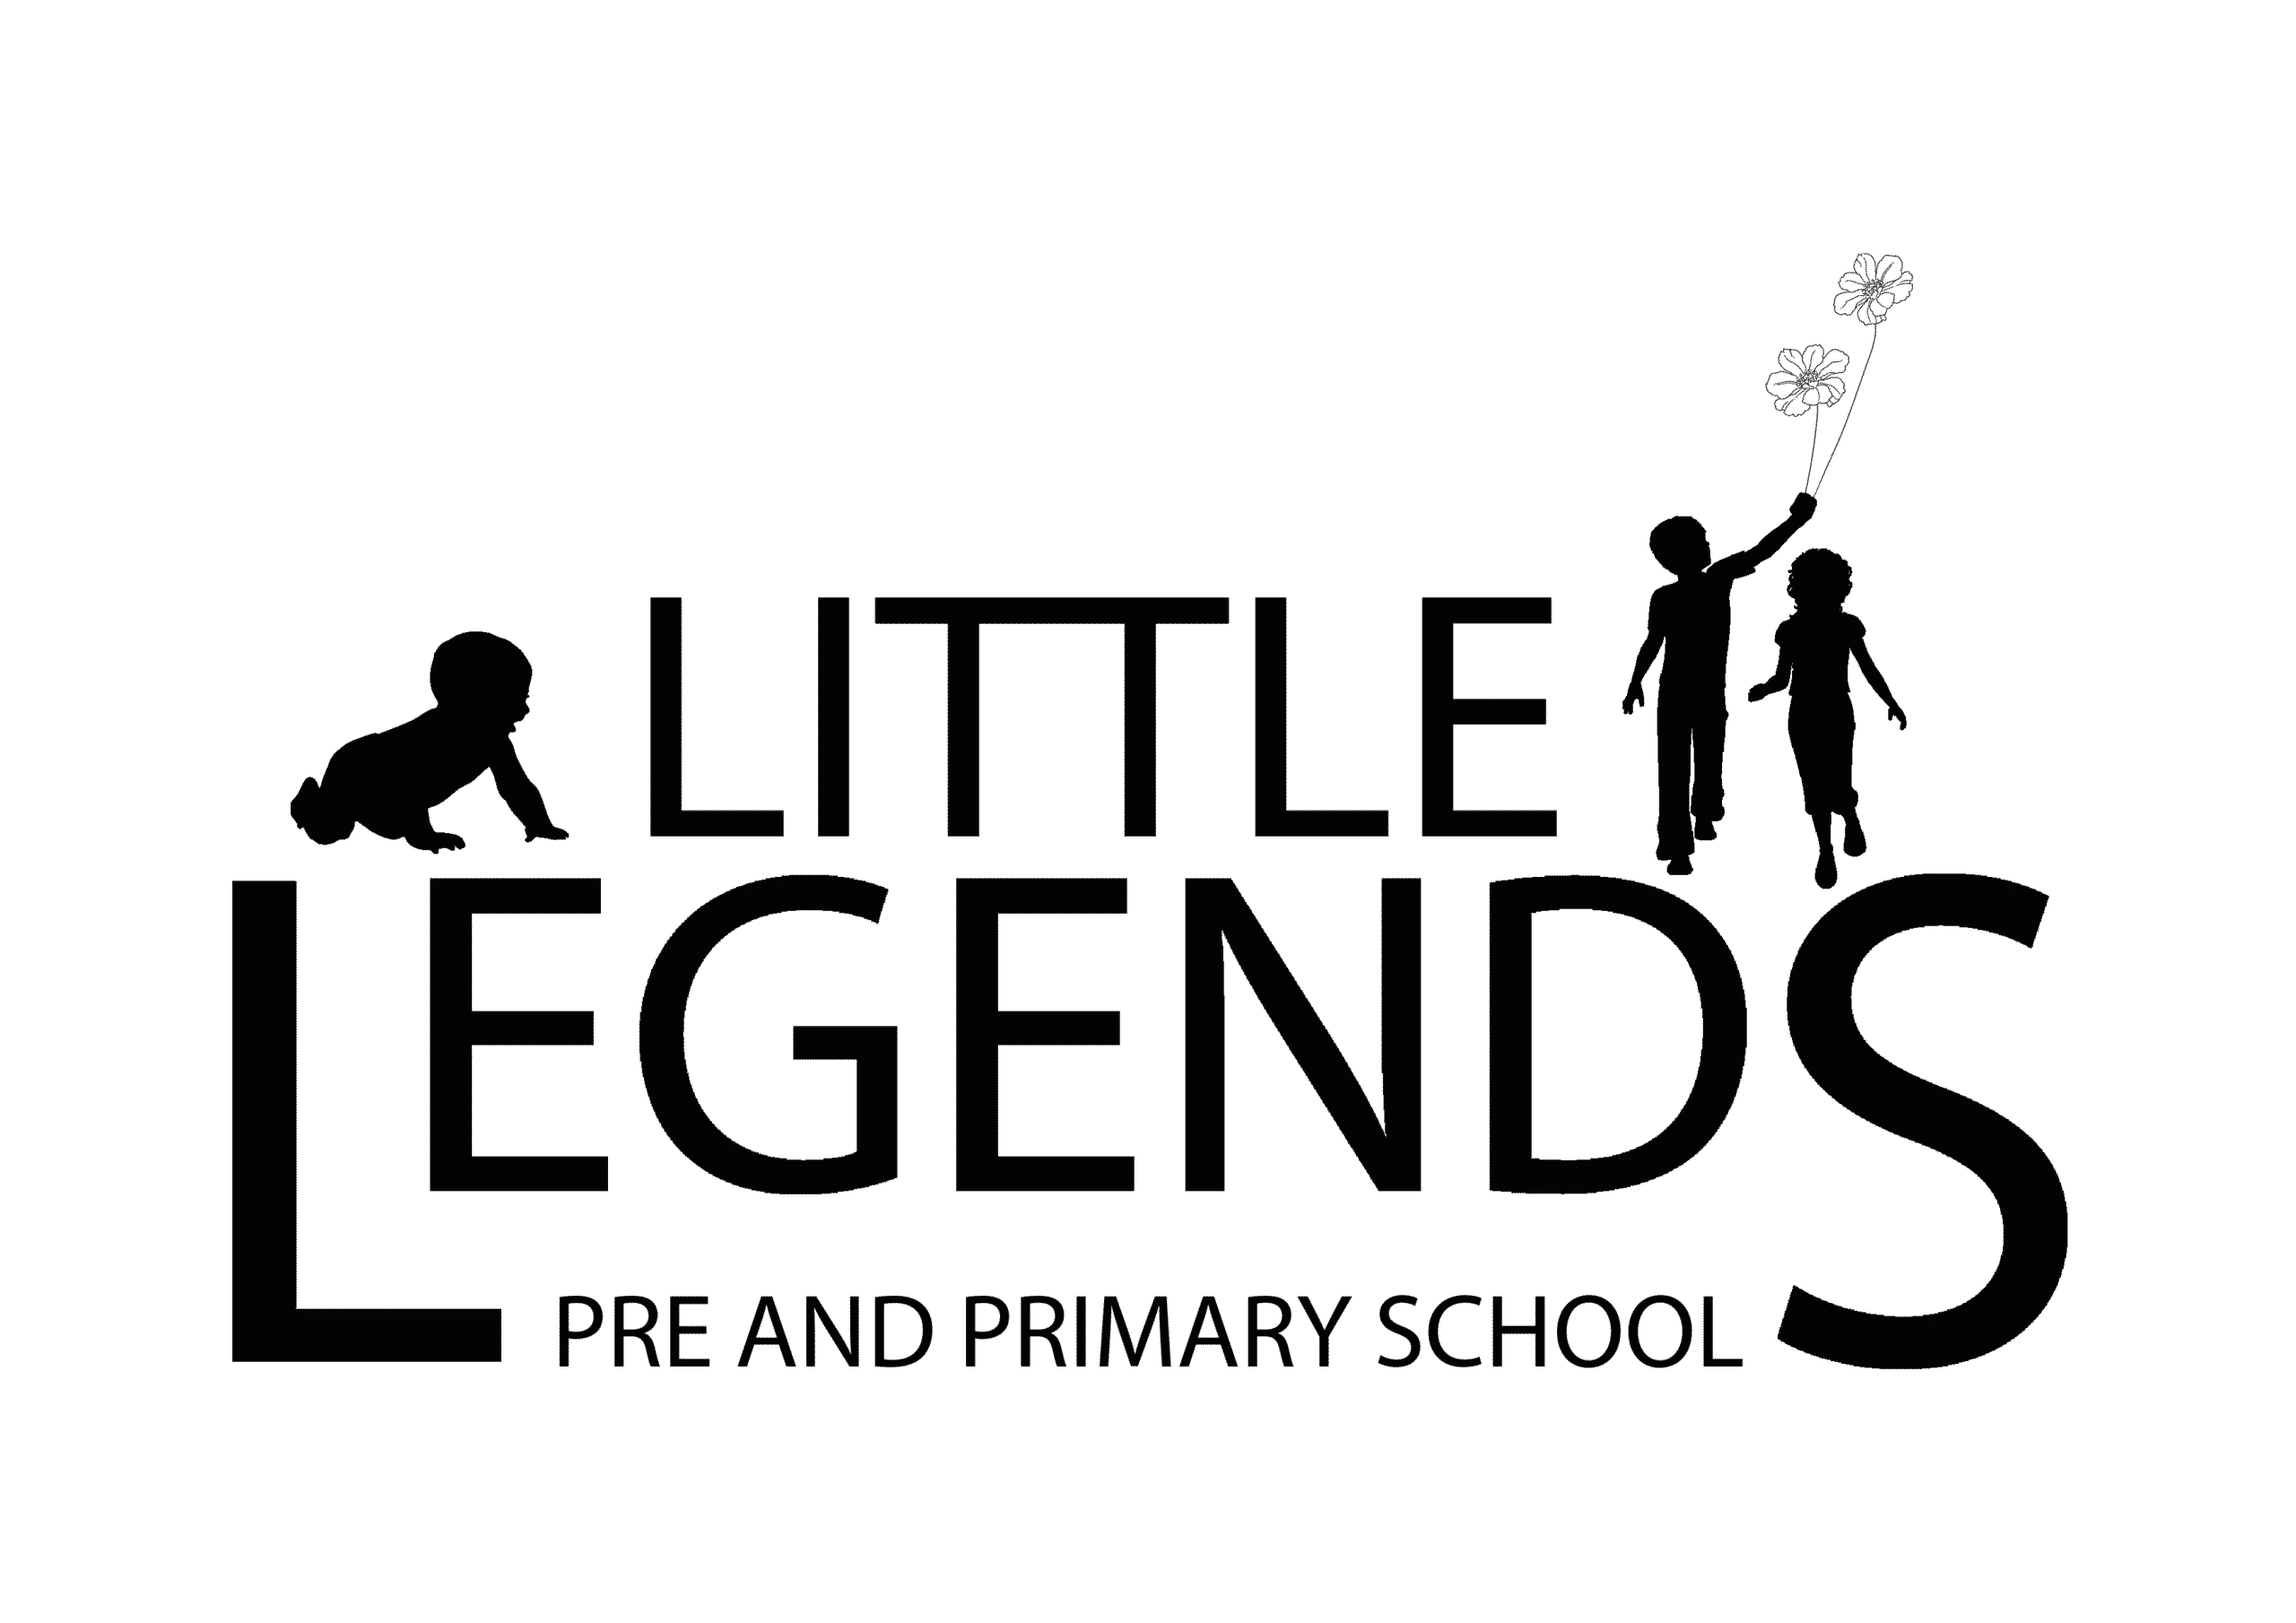 Little Legends Pre and Primary School